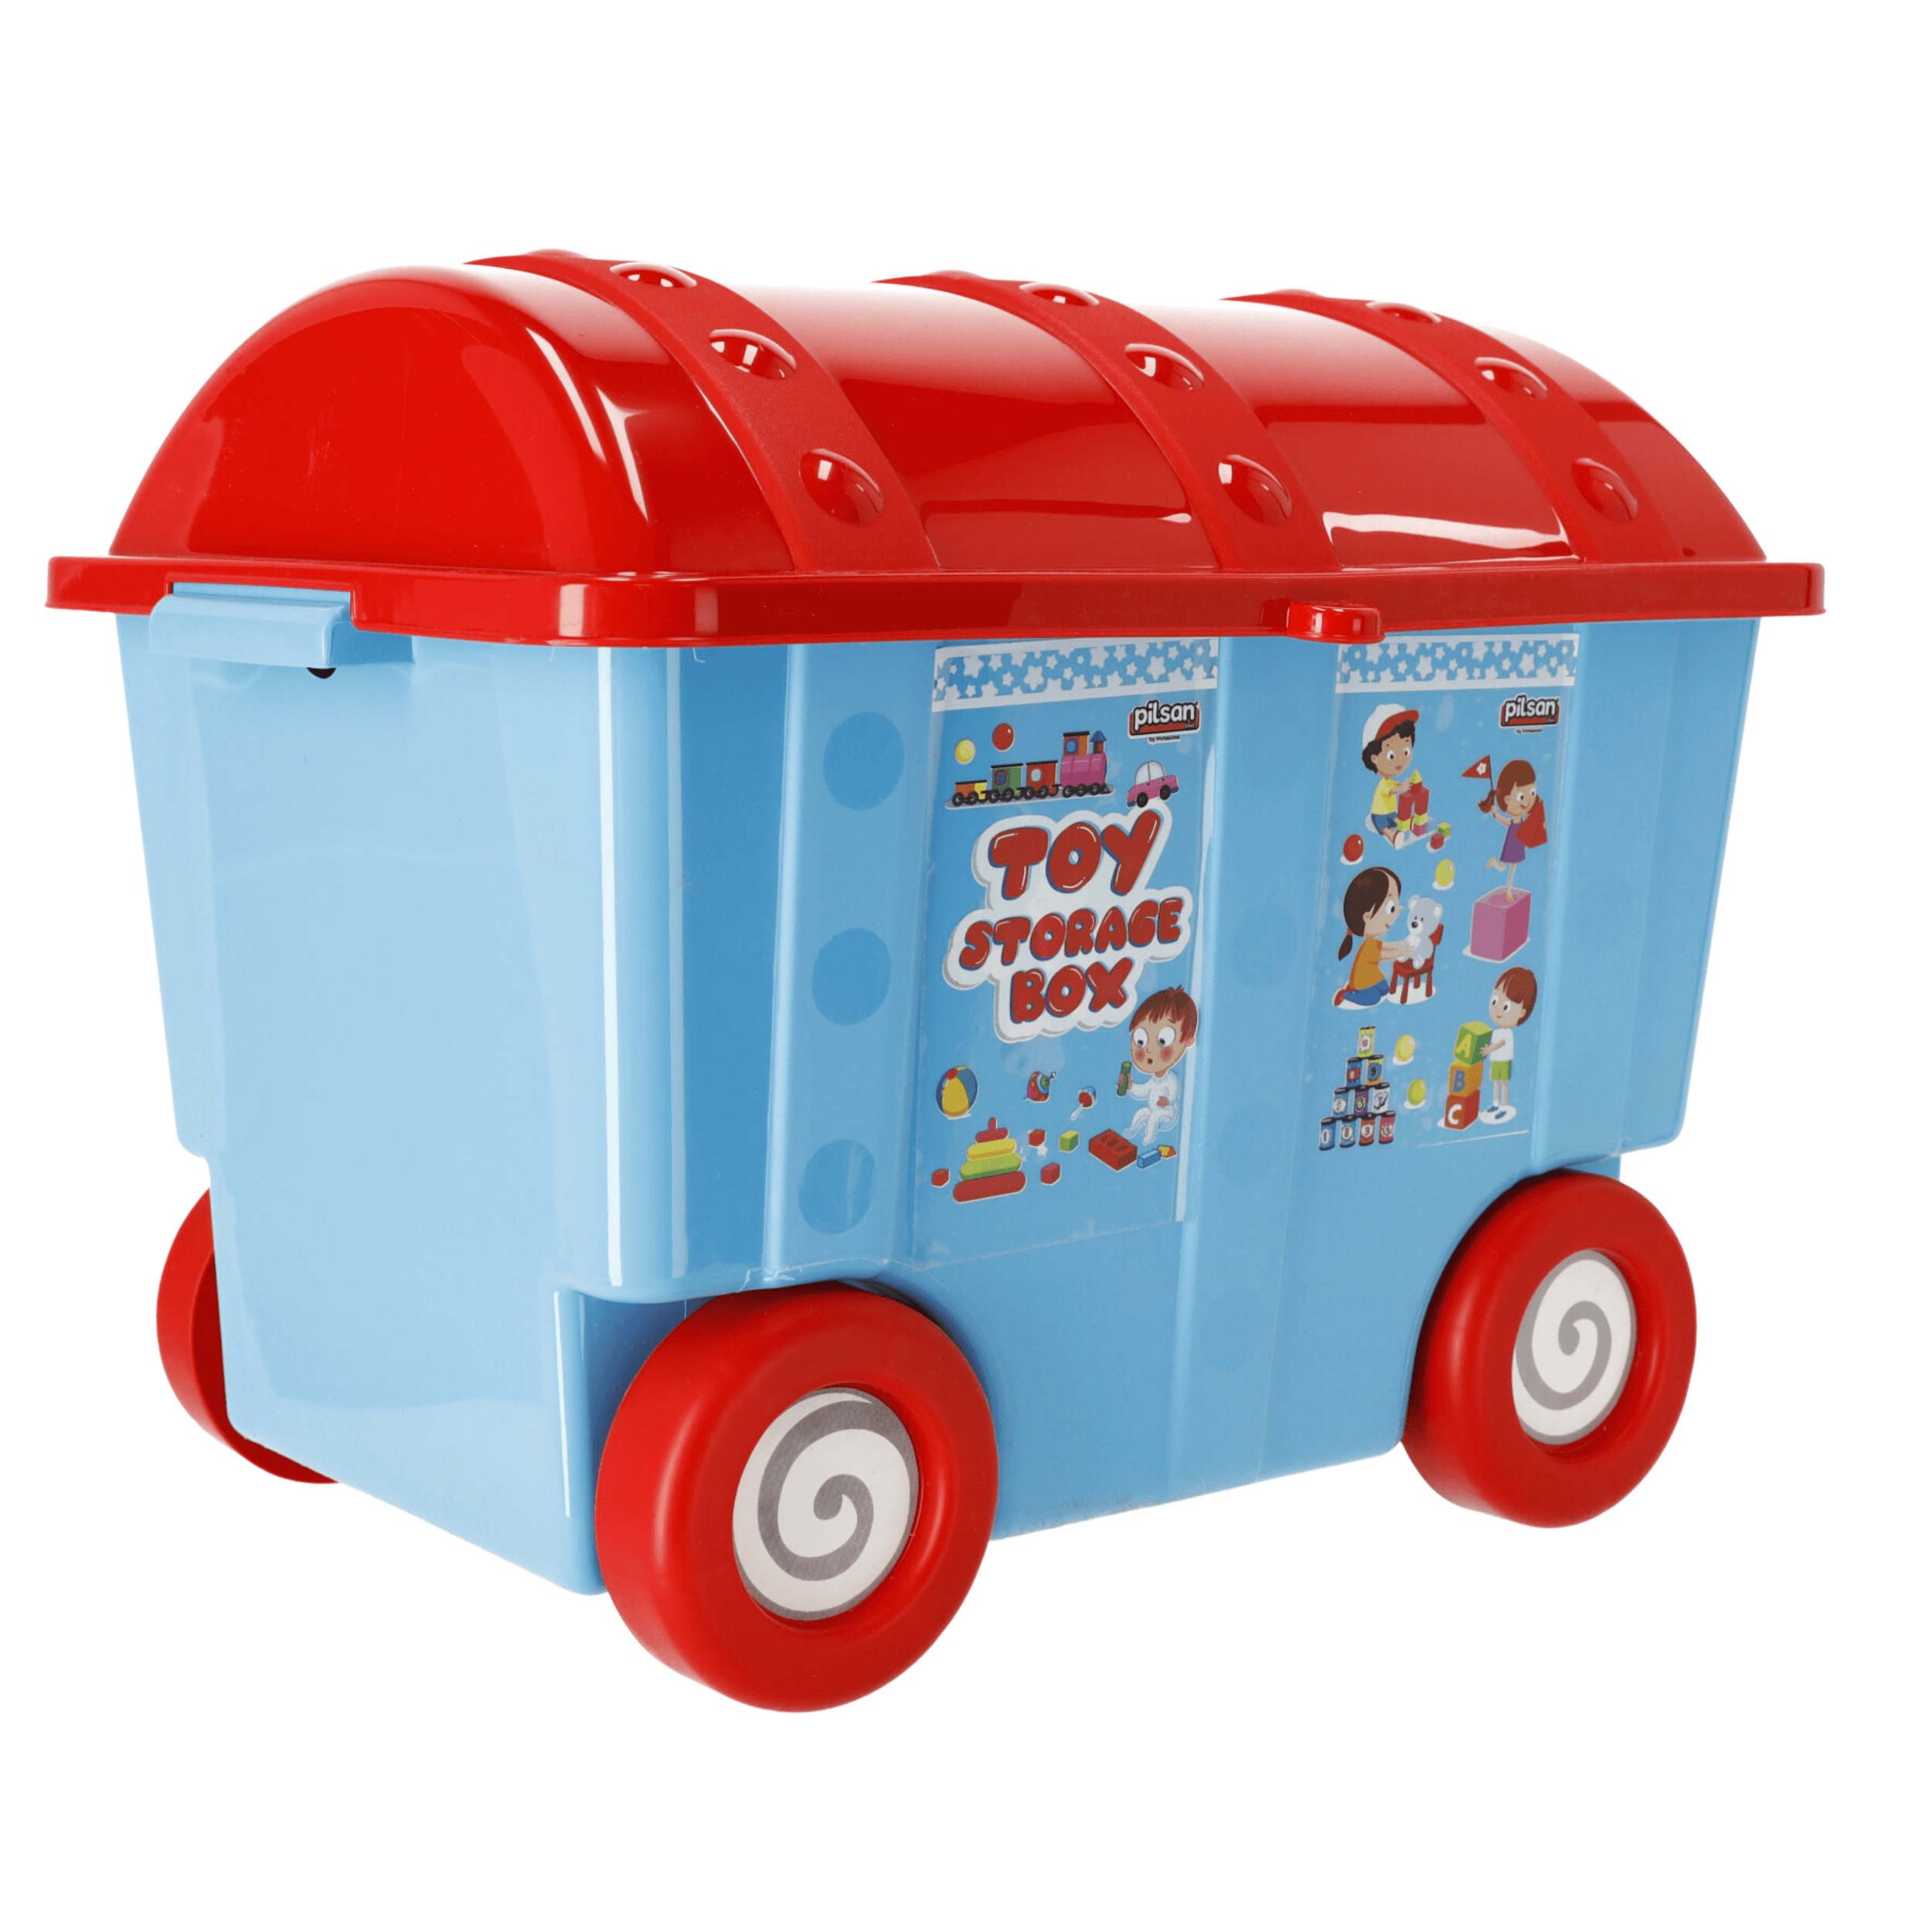 Pilsan Toy Container on Wheels - blue